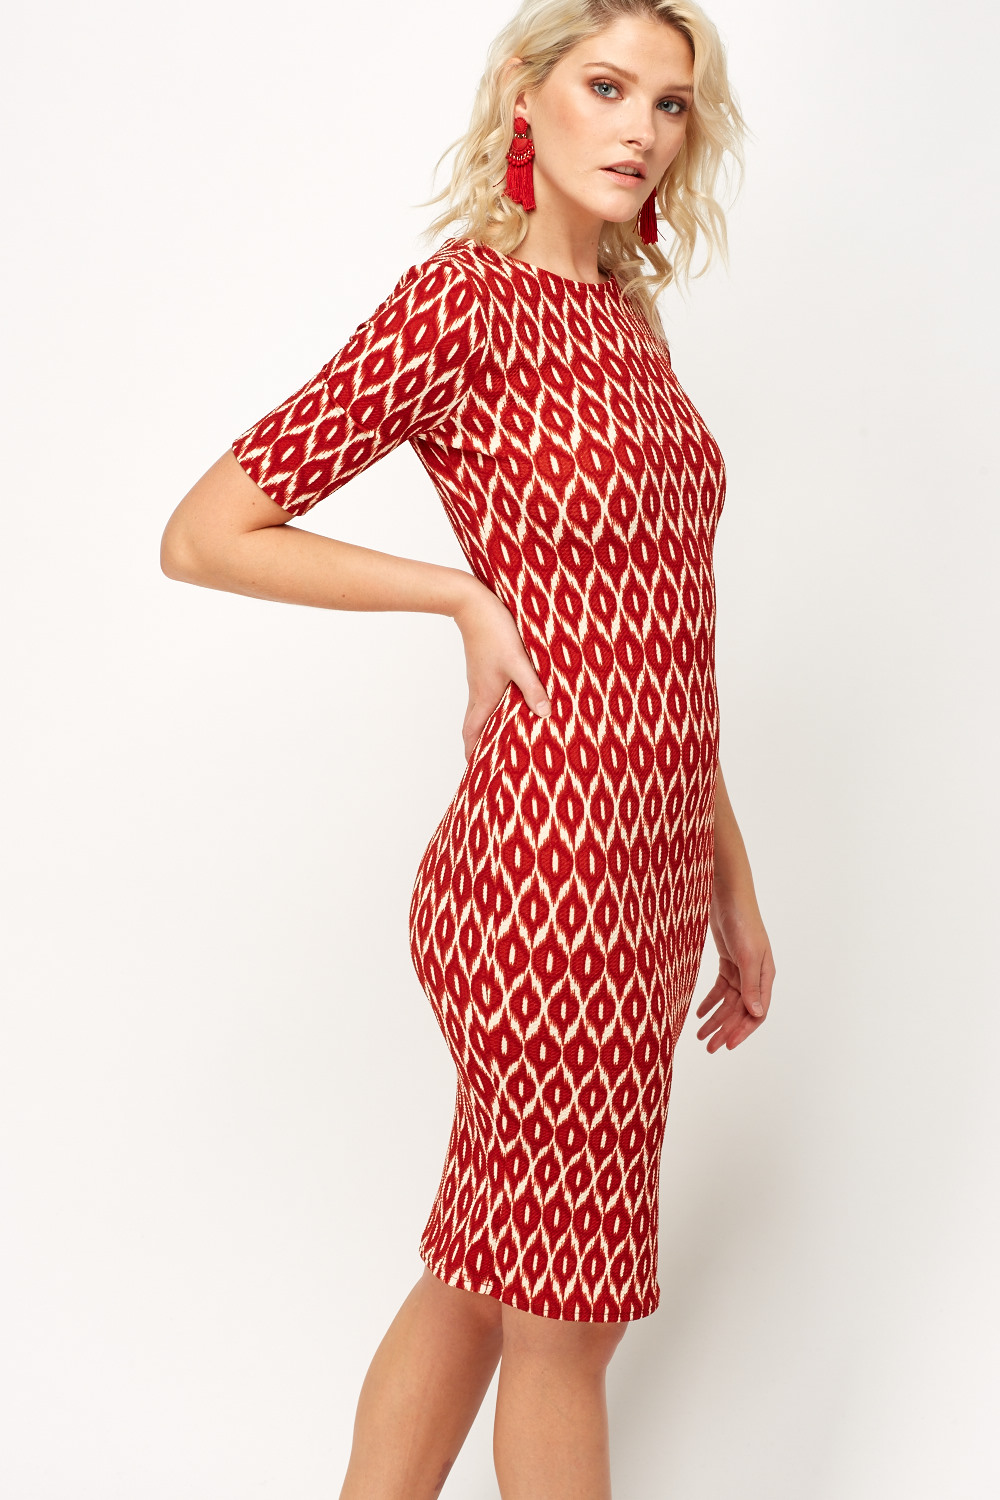 Free bodycon dress pattern pdf free no background whizzle with